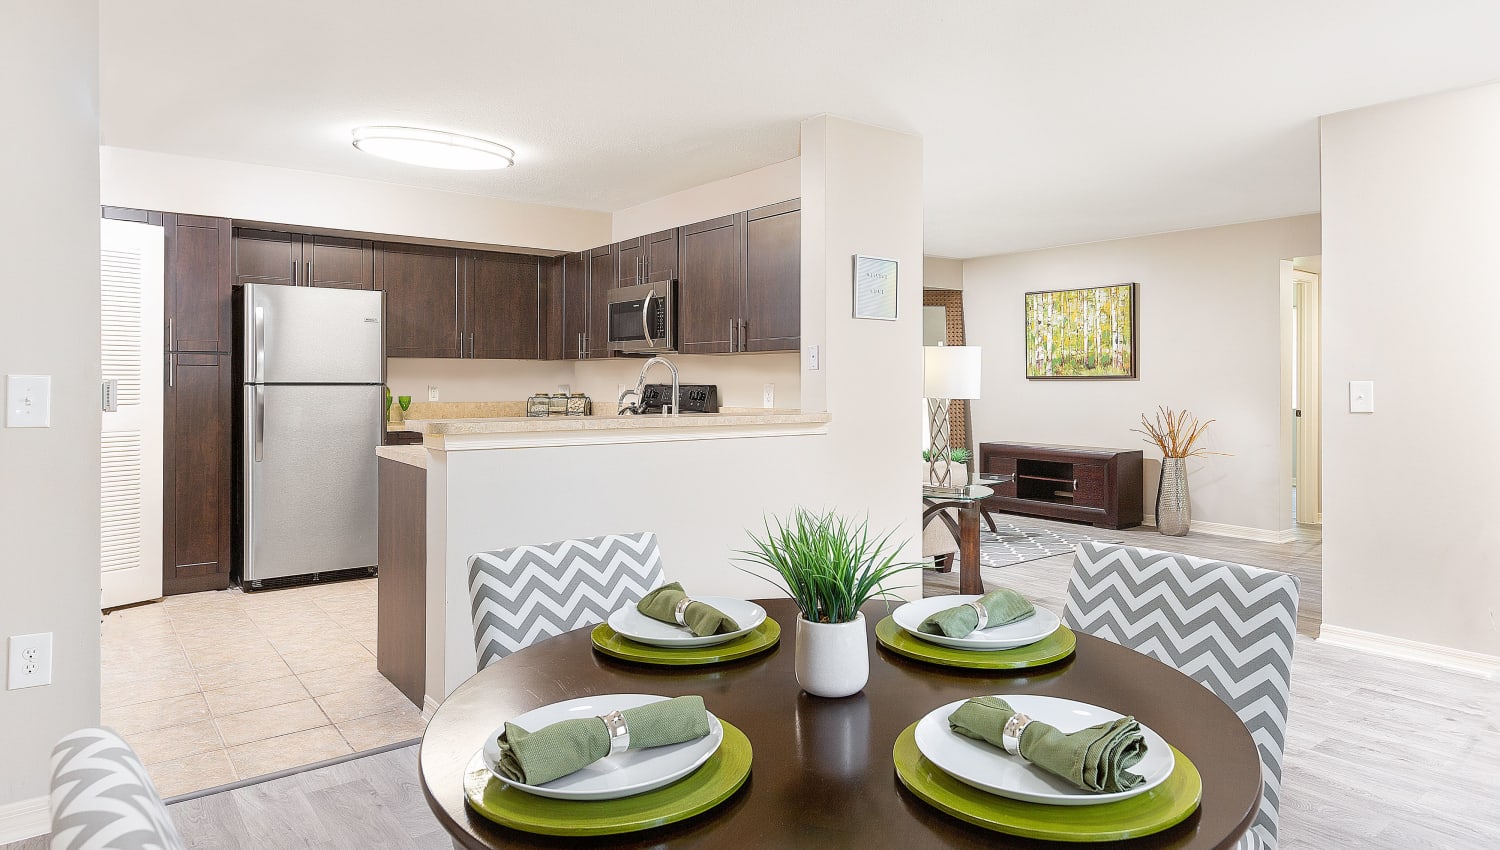 Model kitchen and dining area at Club Lake Pointe Apartments in Coral Springs, Florida